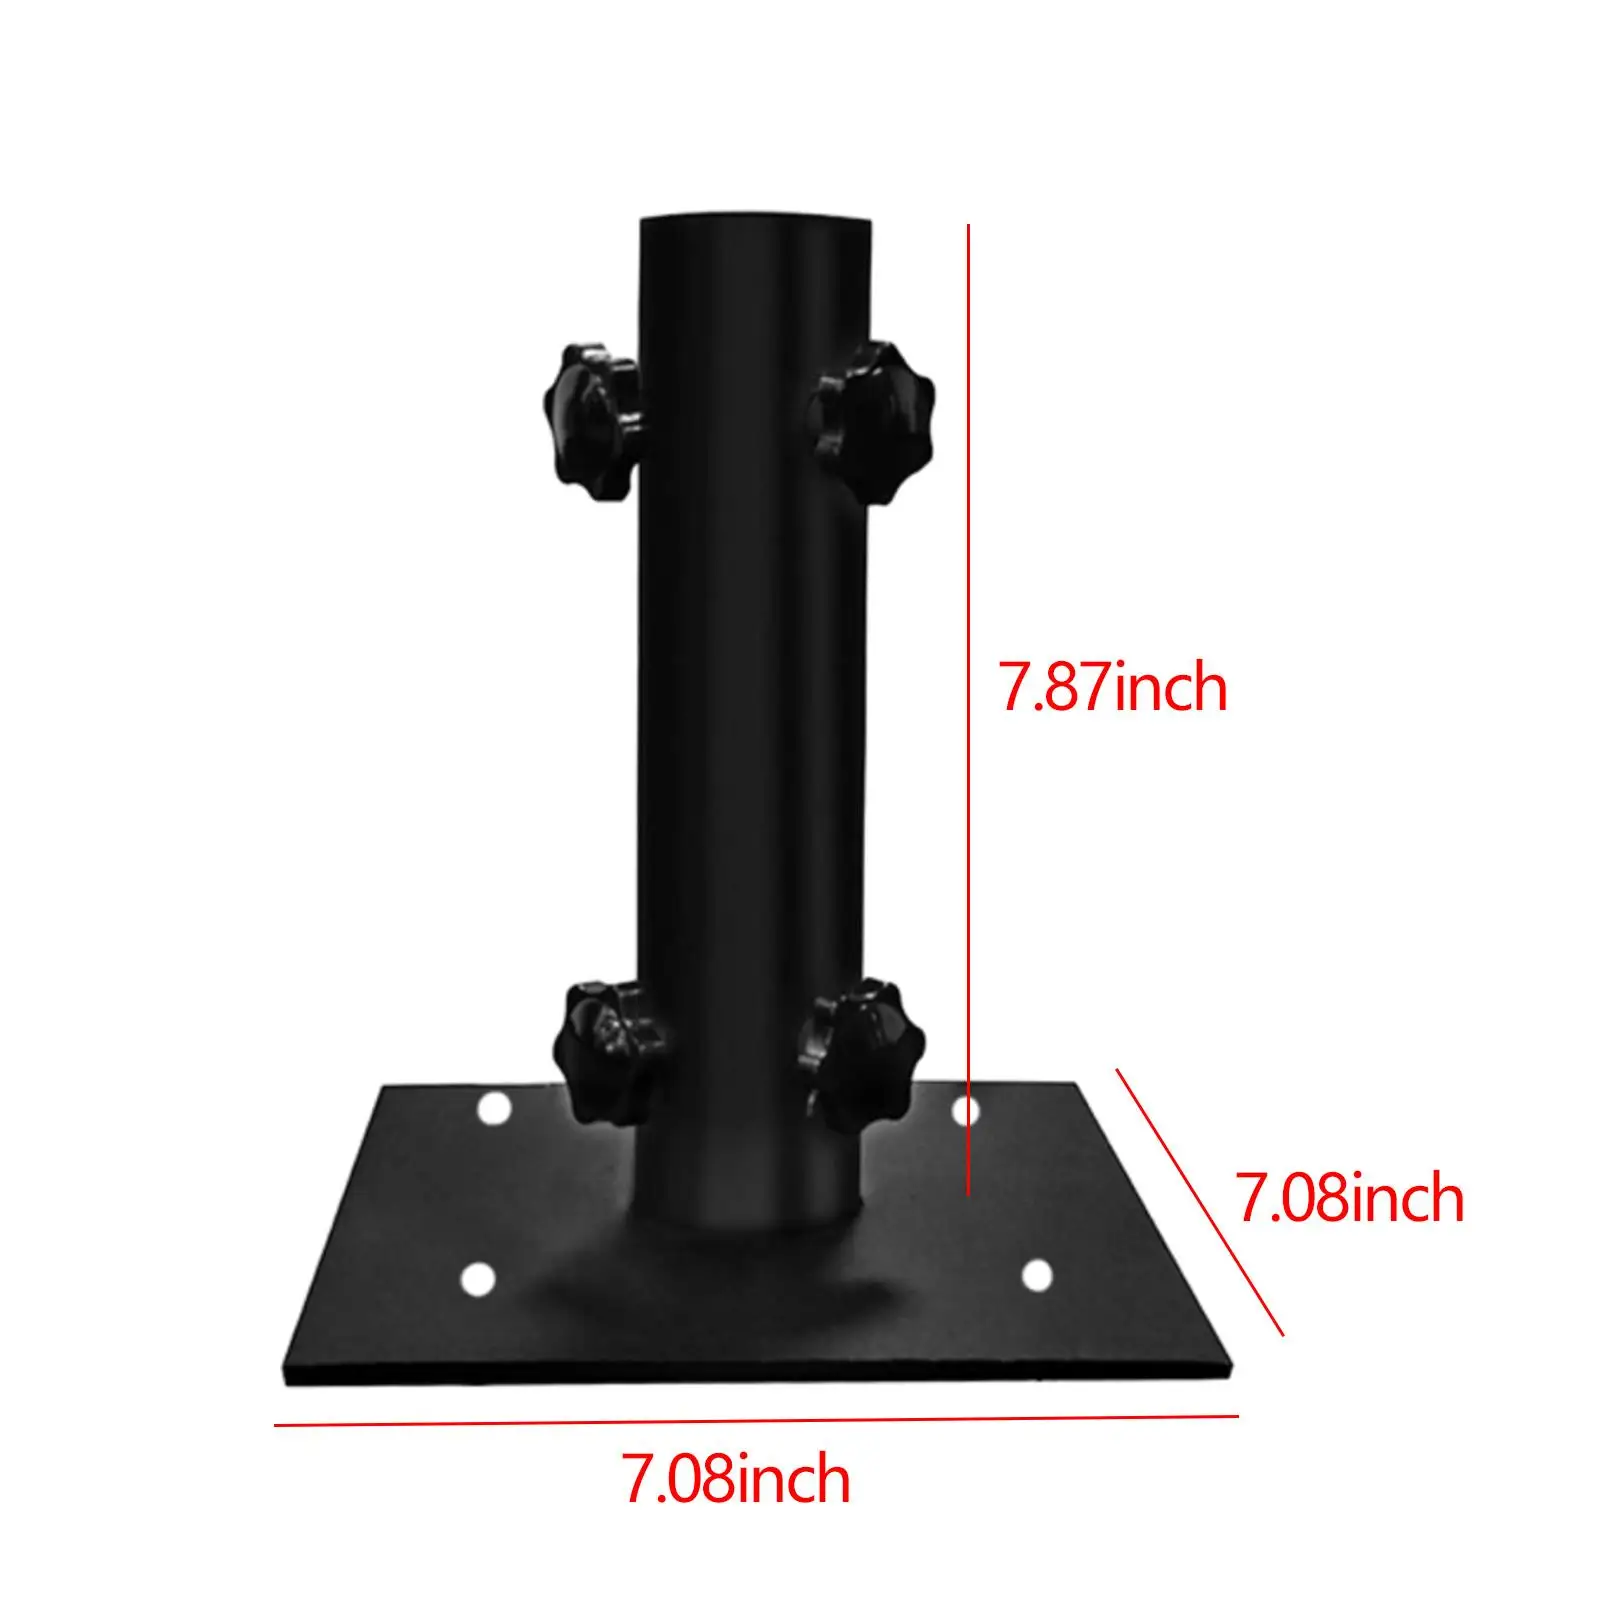 Patio Umbrella Outdoor Base with 4 Adjustable Knobs Umbrella Pole Mount Stand for Courtyard Balcony Patios Deck Mount Pontoons